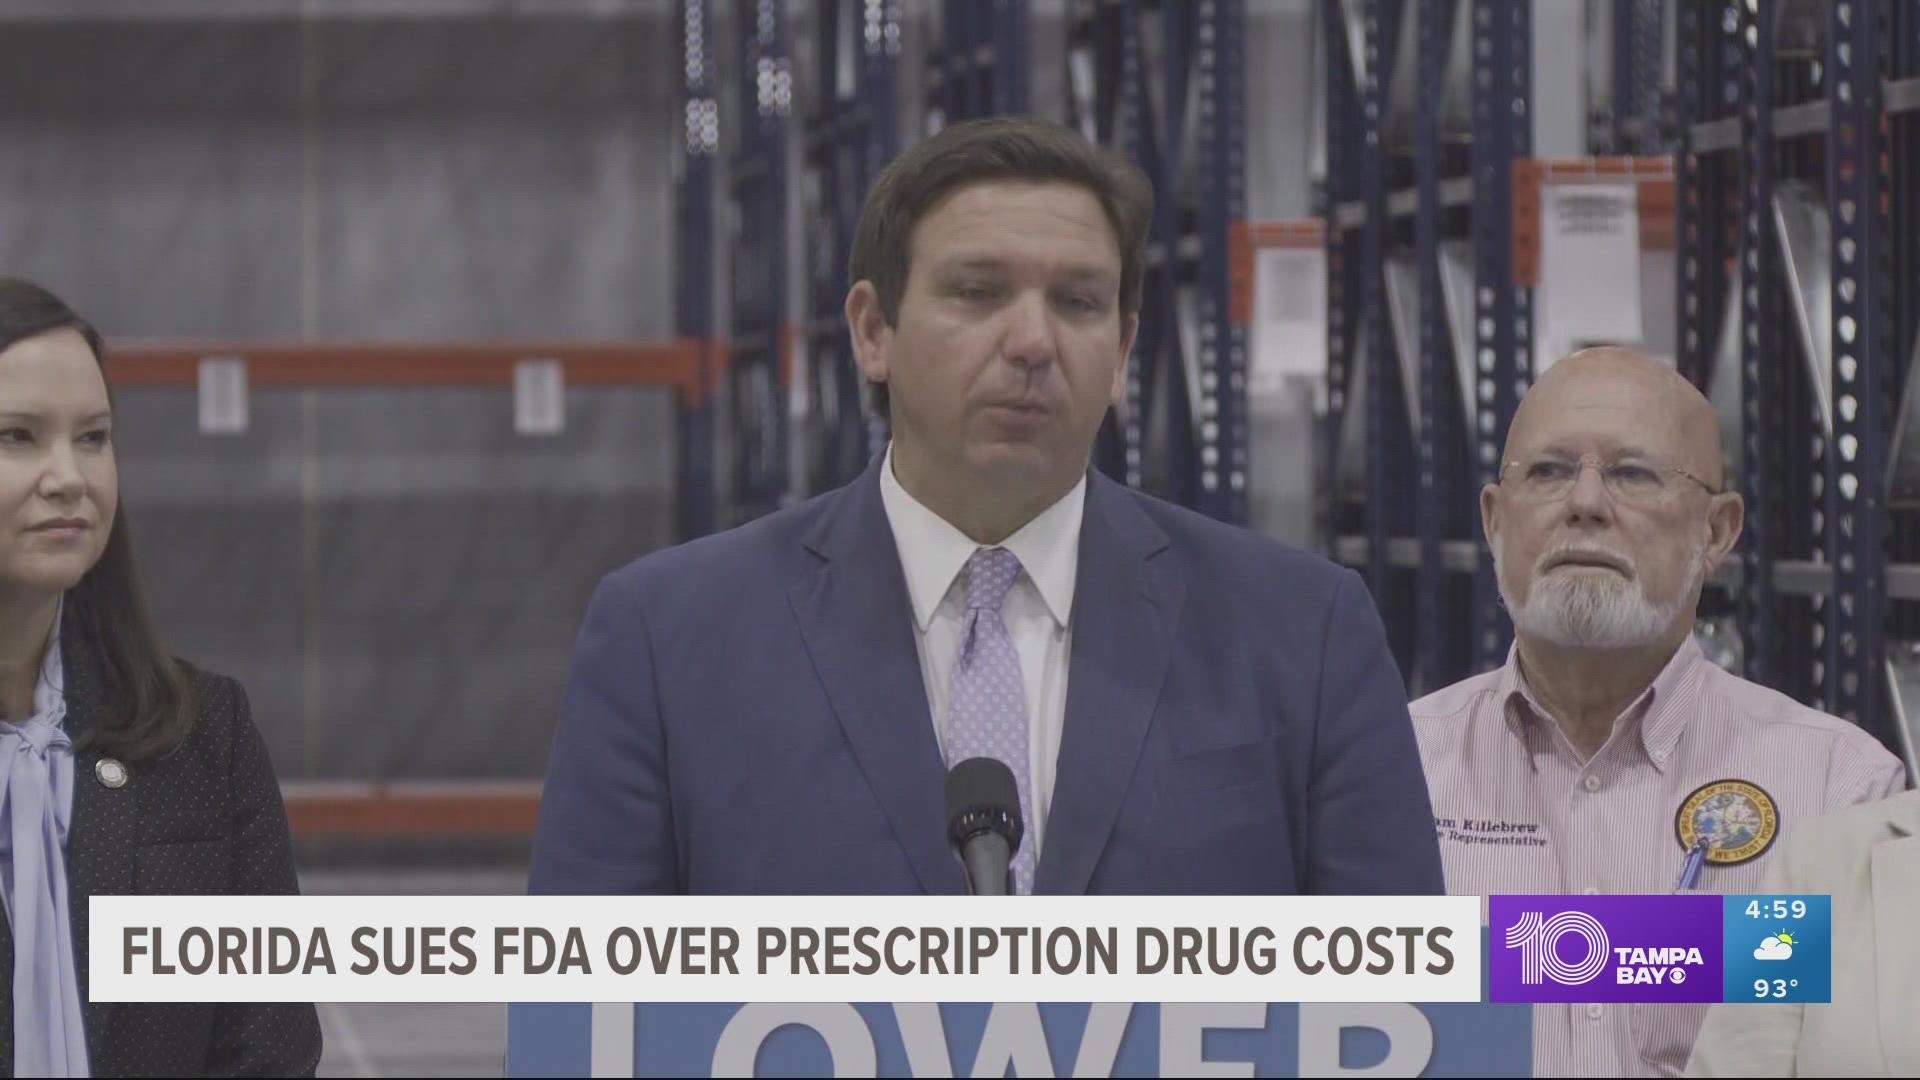 The lawsuit alleges the FDA has not complied with public records request about the state’s proposed plan to bring cheaper drugs in from Canada, DeSantis said.